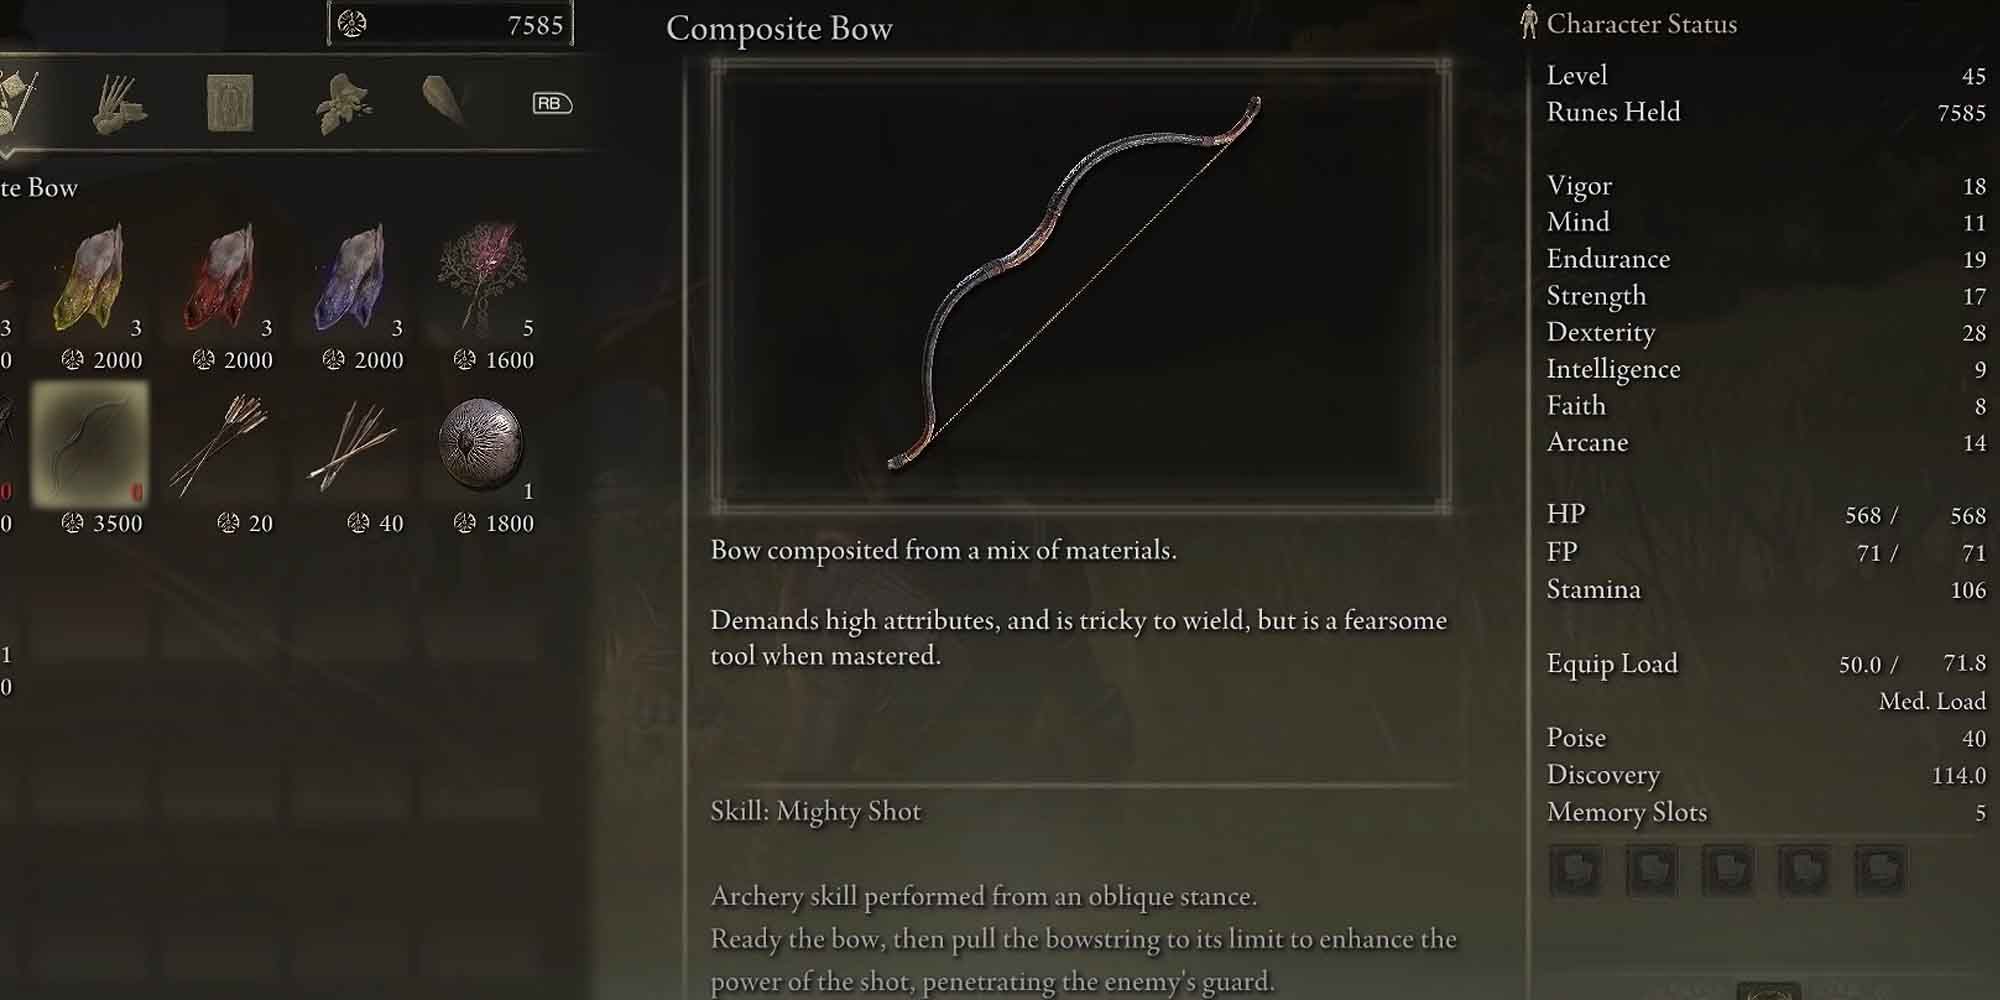 Looking at the Composite Bow in the inventory in Elden Ring